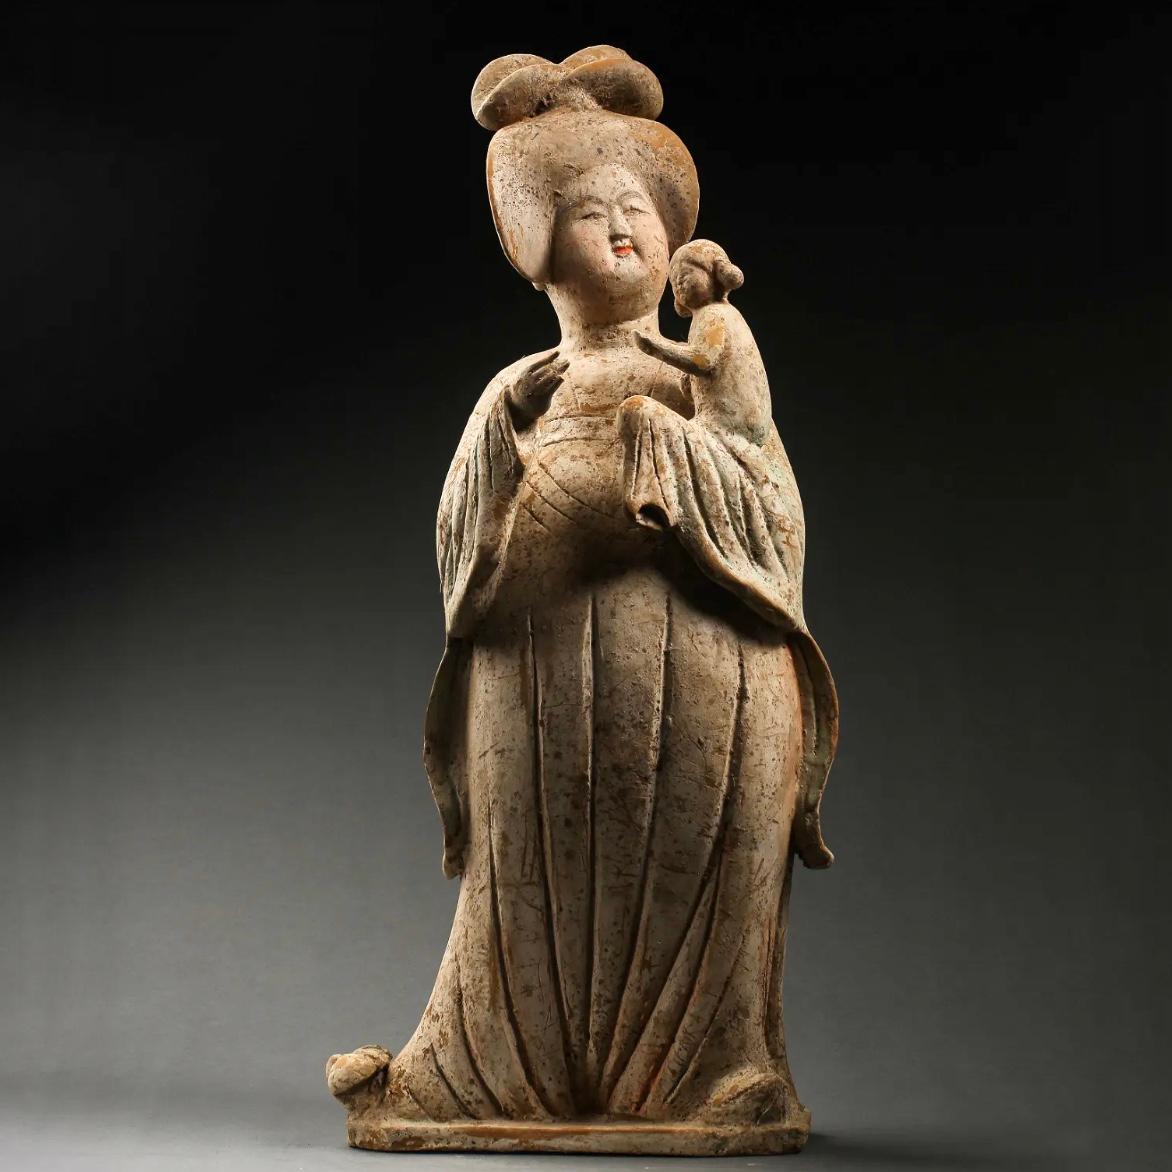 Tang Dynasty polychromed fat lady with child in arm.
Terracotta, pottery
Tang Dynasty (618- 907AD))
Measures: Height: 20.2 inches (51cm)
Width: 9.45 inches (24cm)
Guaranteed Authentic with COA
Condition: Excellent with loss to pinky and wear